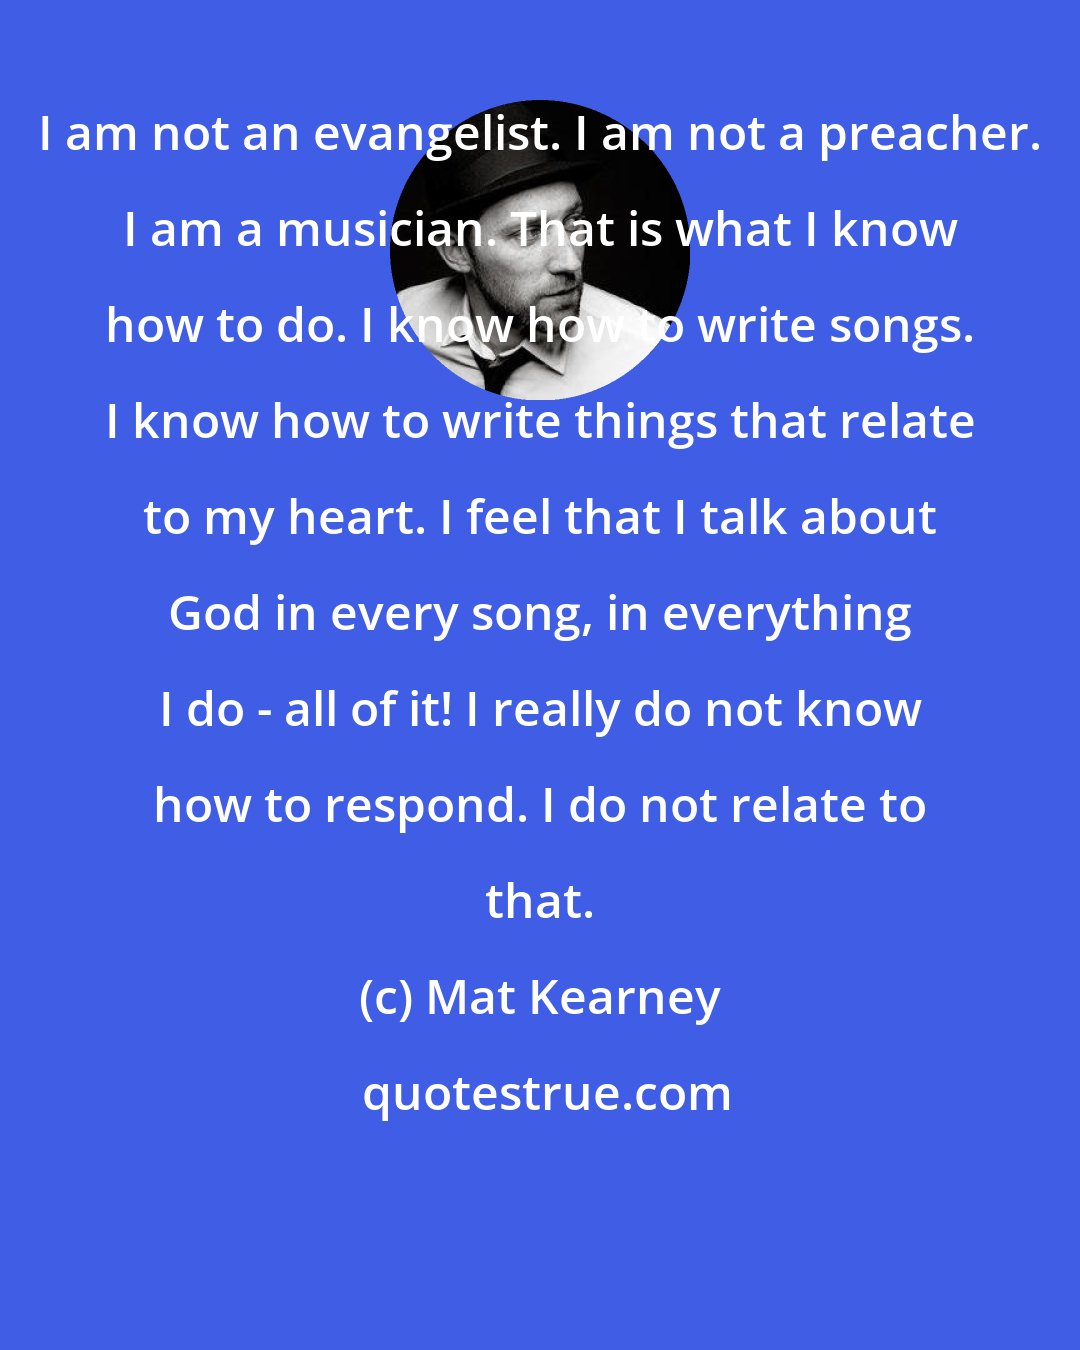 Mat Kearney: I am not an evangelist. I am not a preacher. I am a musician. That is what I know how to do. I know how to write songs. I know how to write things that relate to my heart. I feel that I talk about God in every song, in everything I do - all of it! I really do not know how to respond. I do not relate to that.